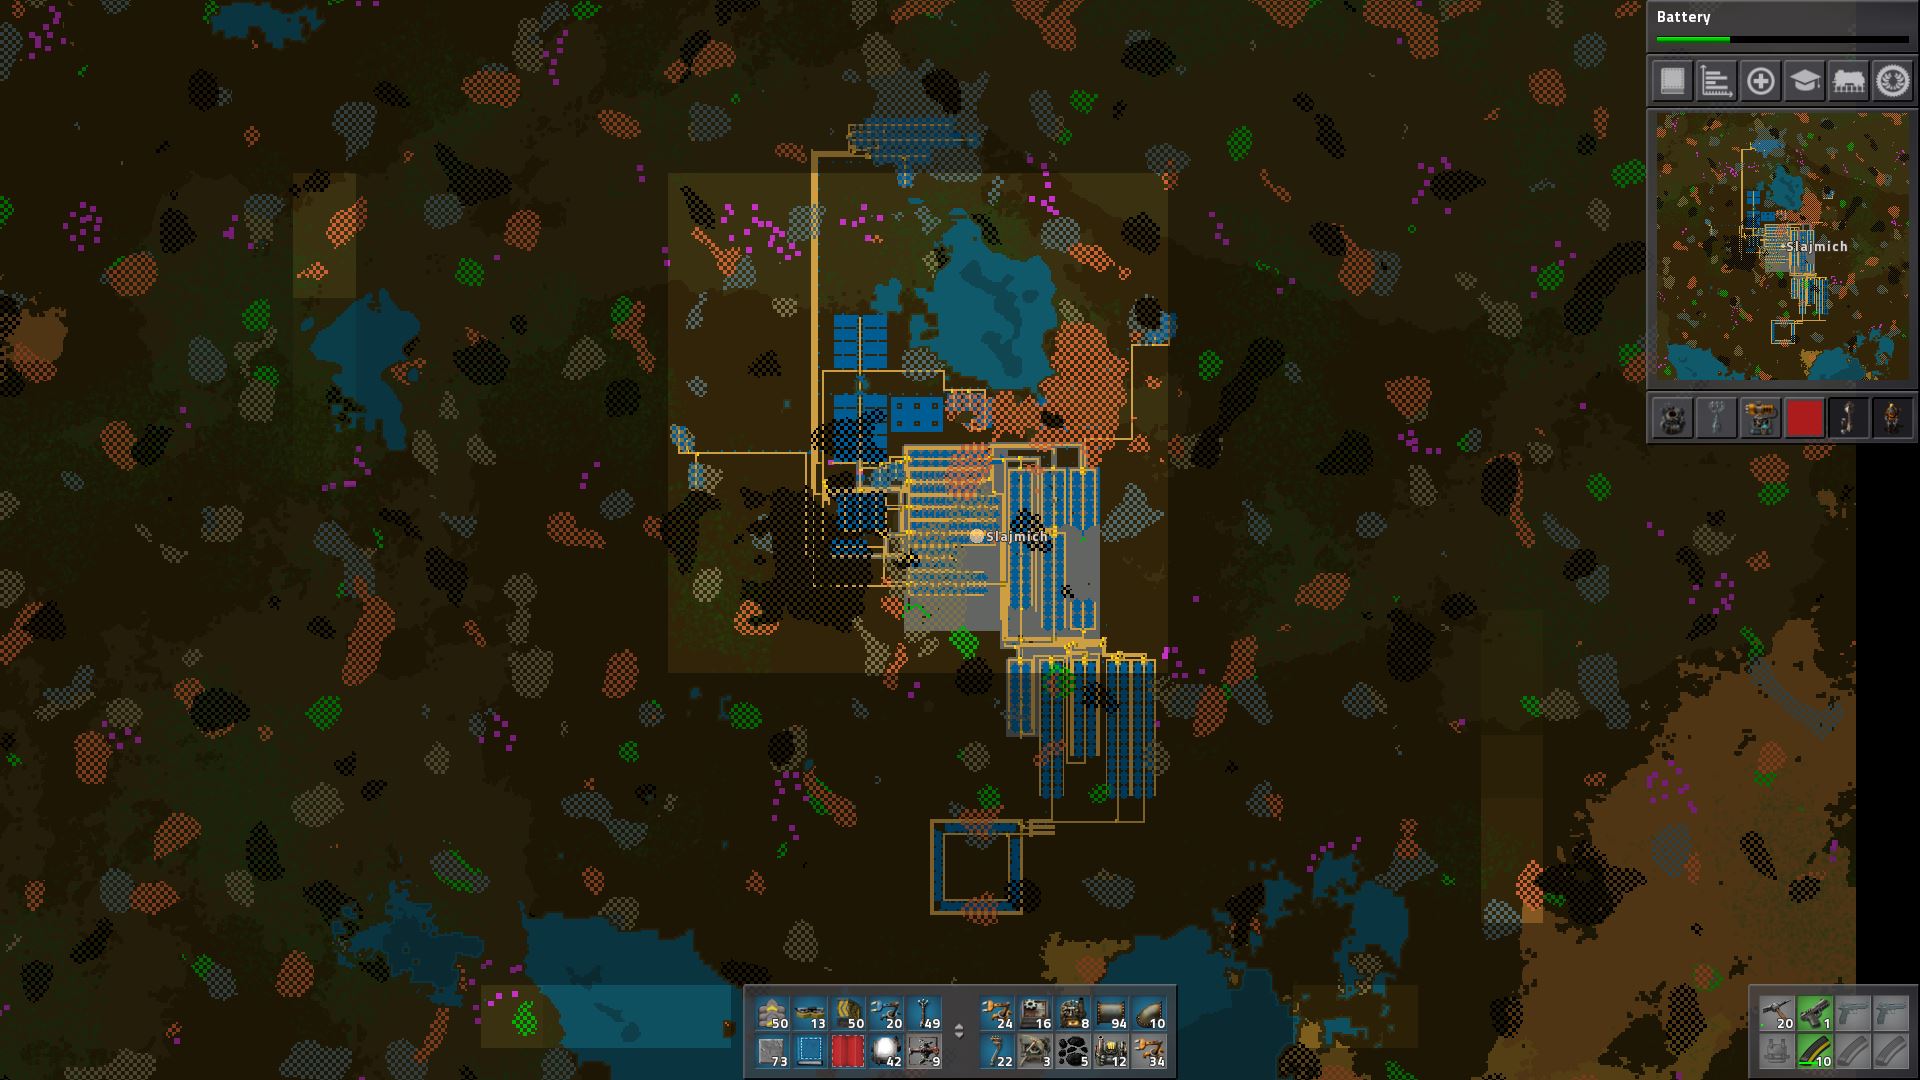 To give an idea of my base, btw I like playing with a lot of recources since i like figuring out the logistics more than scavenging.